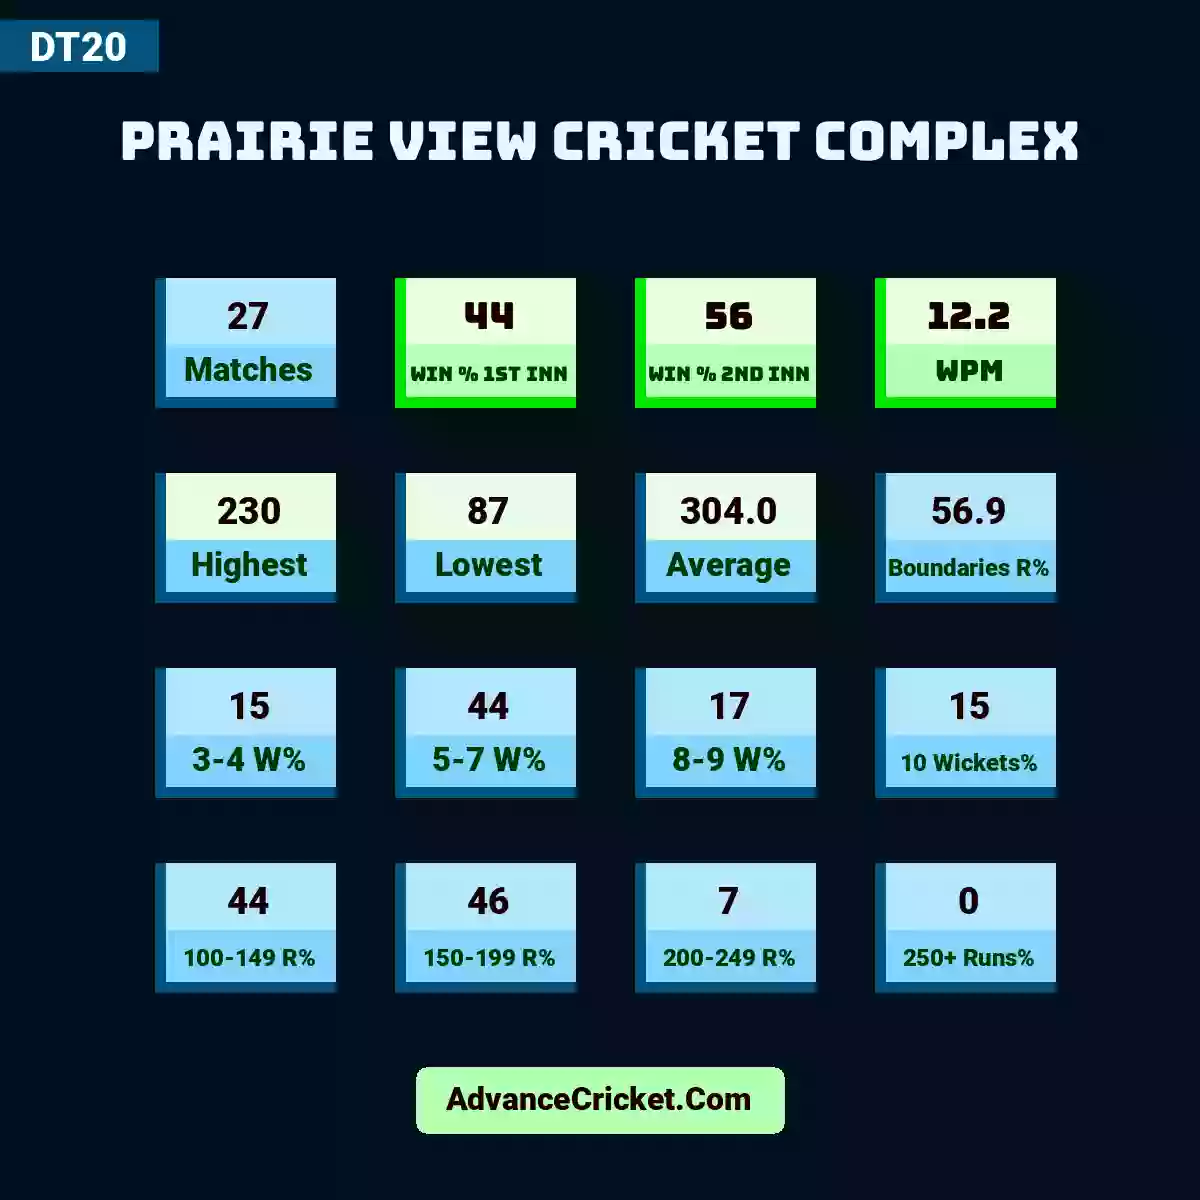 Image showing Prairie View Cricket Complex DT20 with Matches: 27, Win % 1st Inn: 44, Win % 2nd Inn: 56, WPM: 12.2, Highest: 230, Lowest: 87, Average: 304.0, Boundaries R%: 56.9, 3-4 W%: 15, 5-7 W%: 44, 8-9 W%: 17, 10 Wickets%: 15, 100-149 R%: 44, 150-199 R%: 46, 200-249 R%: 7, 250+ Runs%: 0.